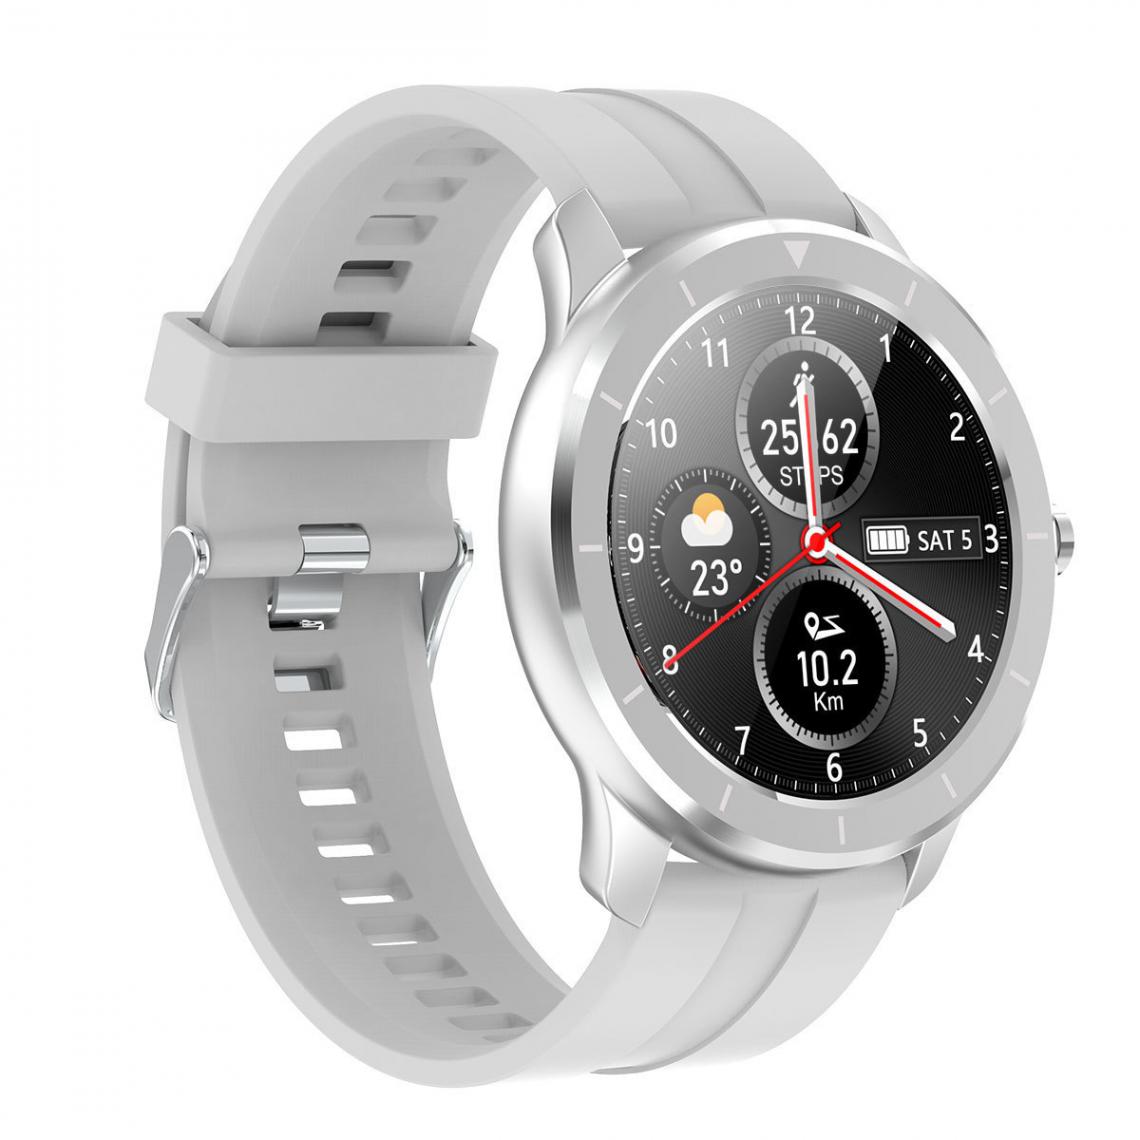 Chronotech Montres - Chronus 1.28 Inch 45mm Full Touch Screen Sports Smart Watch with Heart Rate Monitor, Pedometer(silver) - Montre connectée